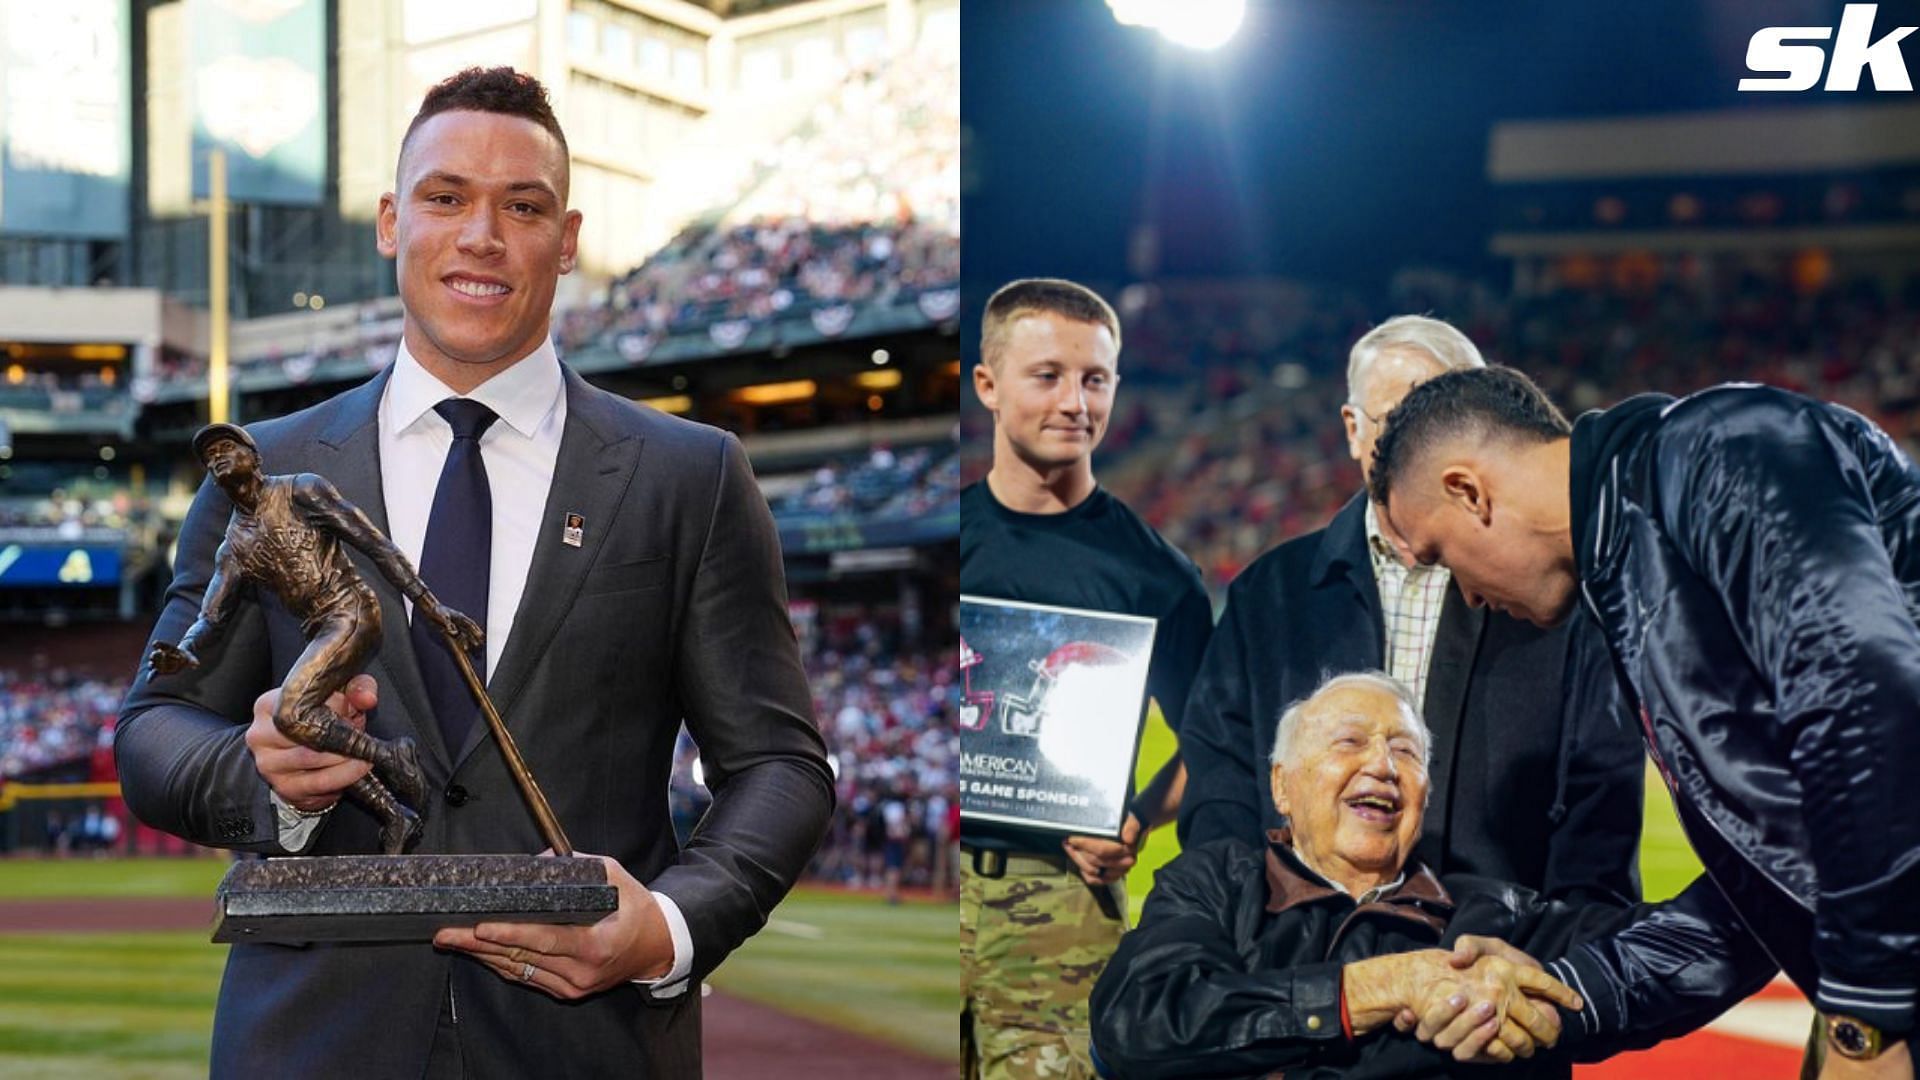 103-year-old WWII Veteran Rodger Jensen shares endearing moment with Yankees star Aaron Judge at Fresno State jersey retirement celebration